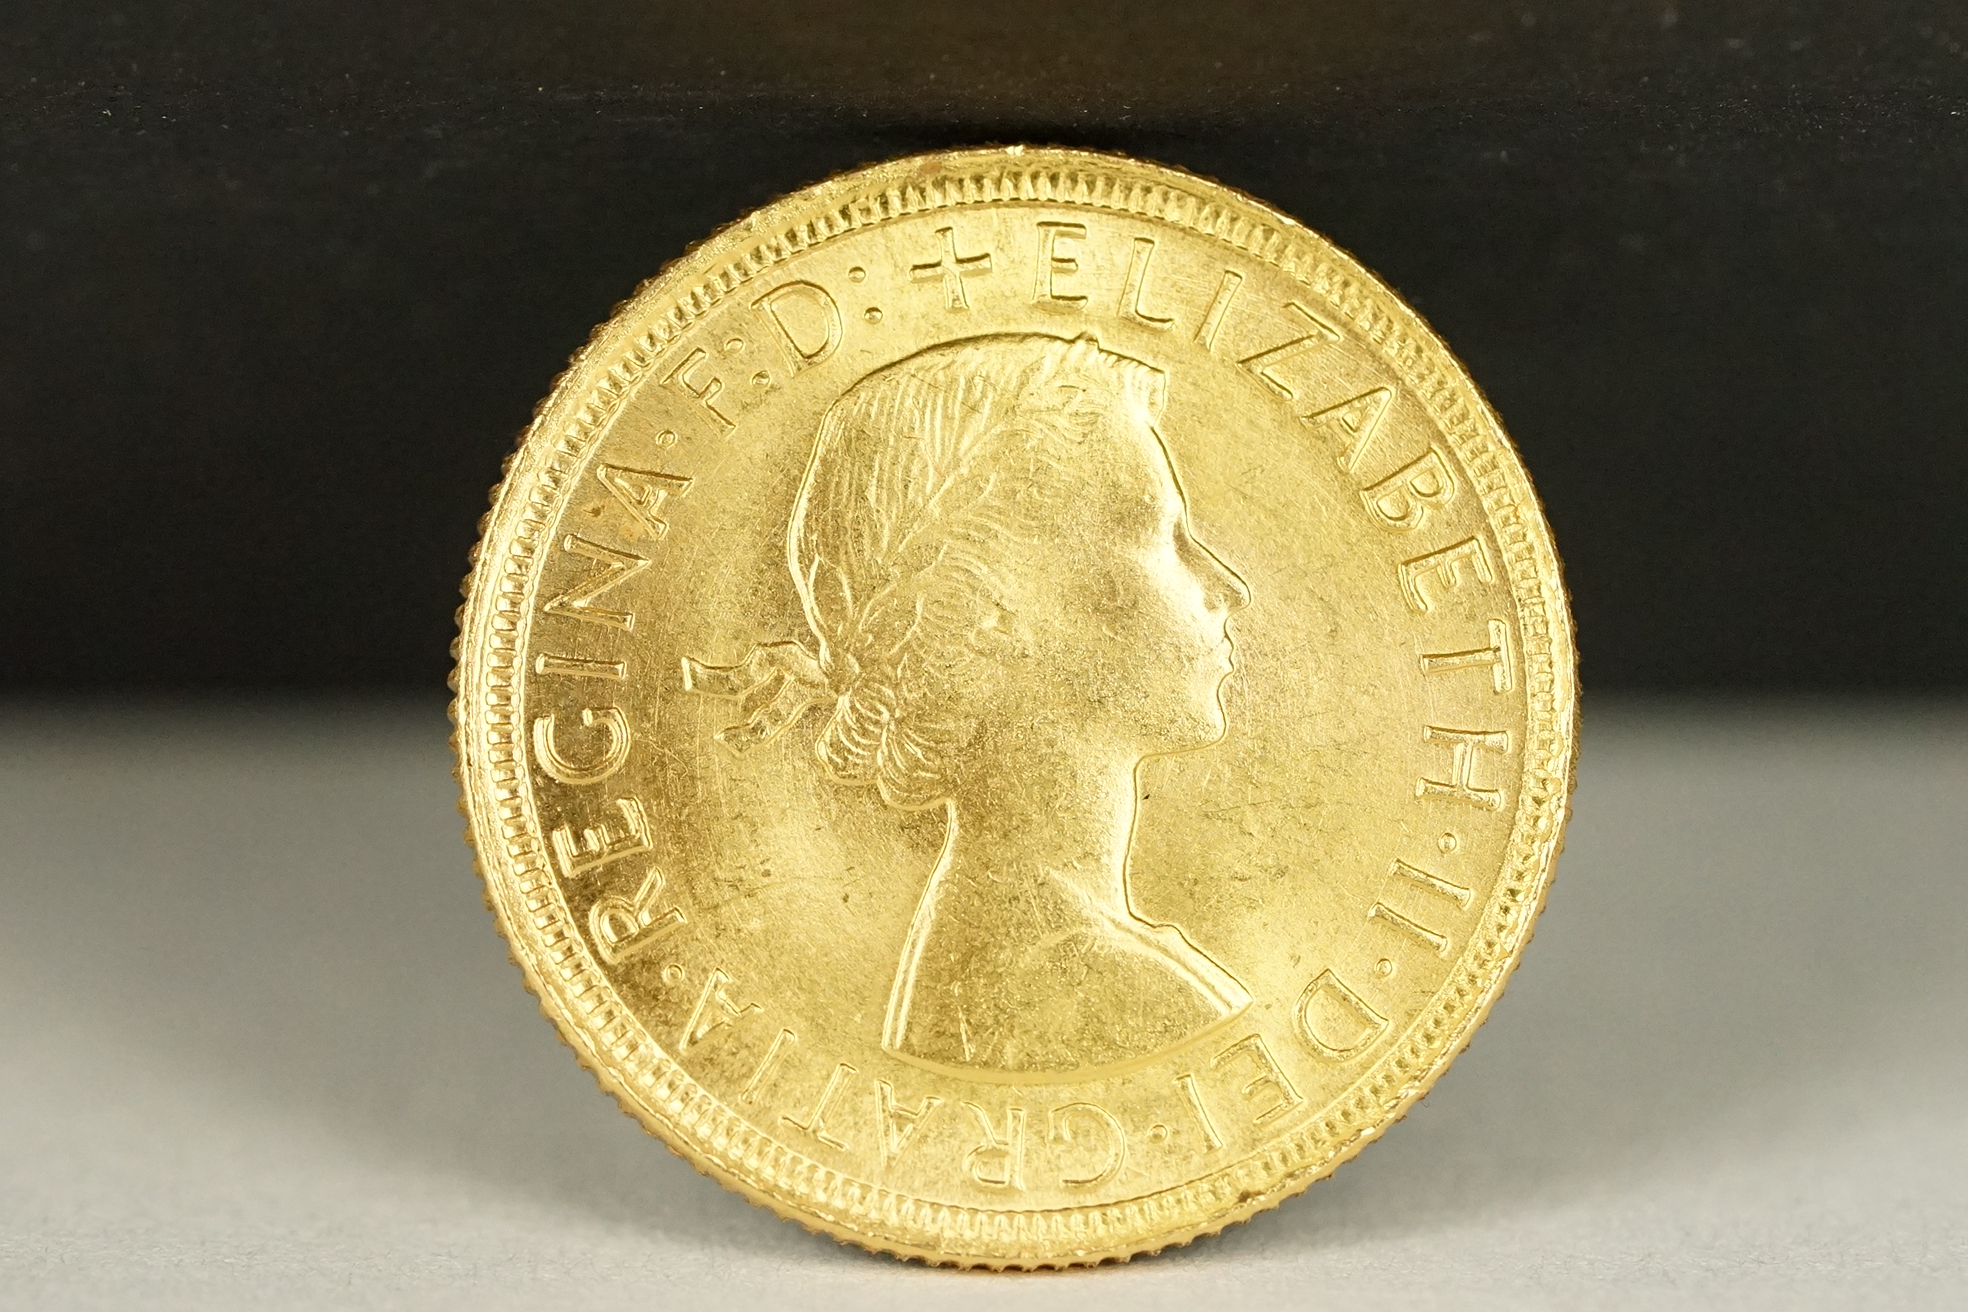 A British Queen Elizabeth II 1957 gold full sovereign coin. - Image 2 of 3